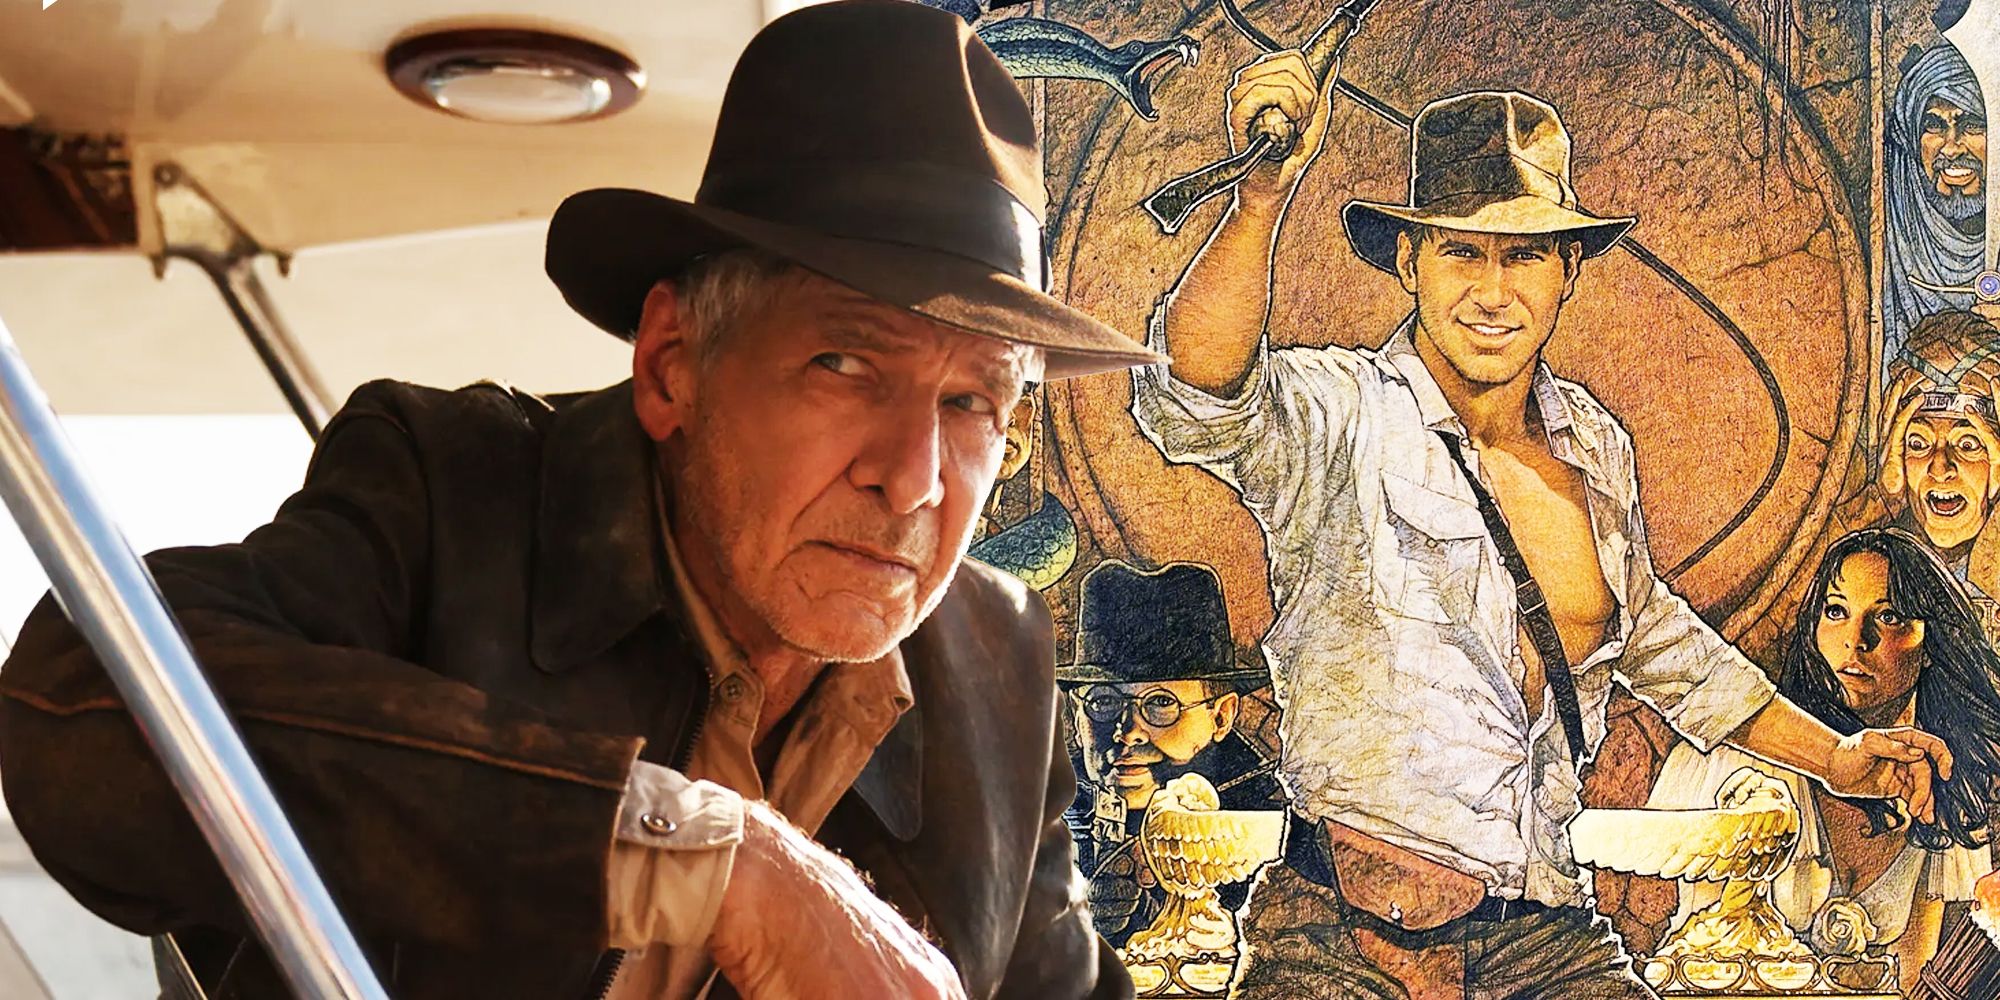 Indiana Jones and the Raiders poster